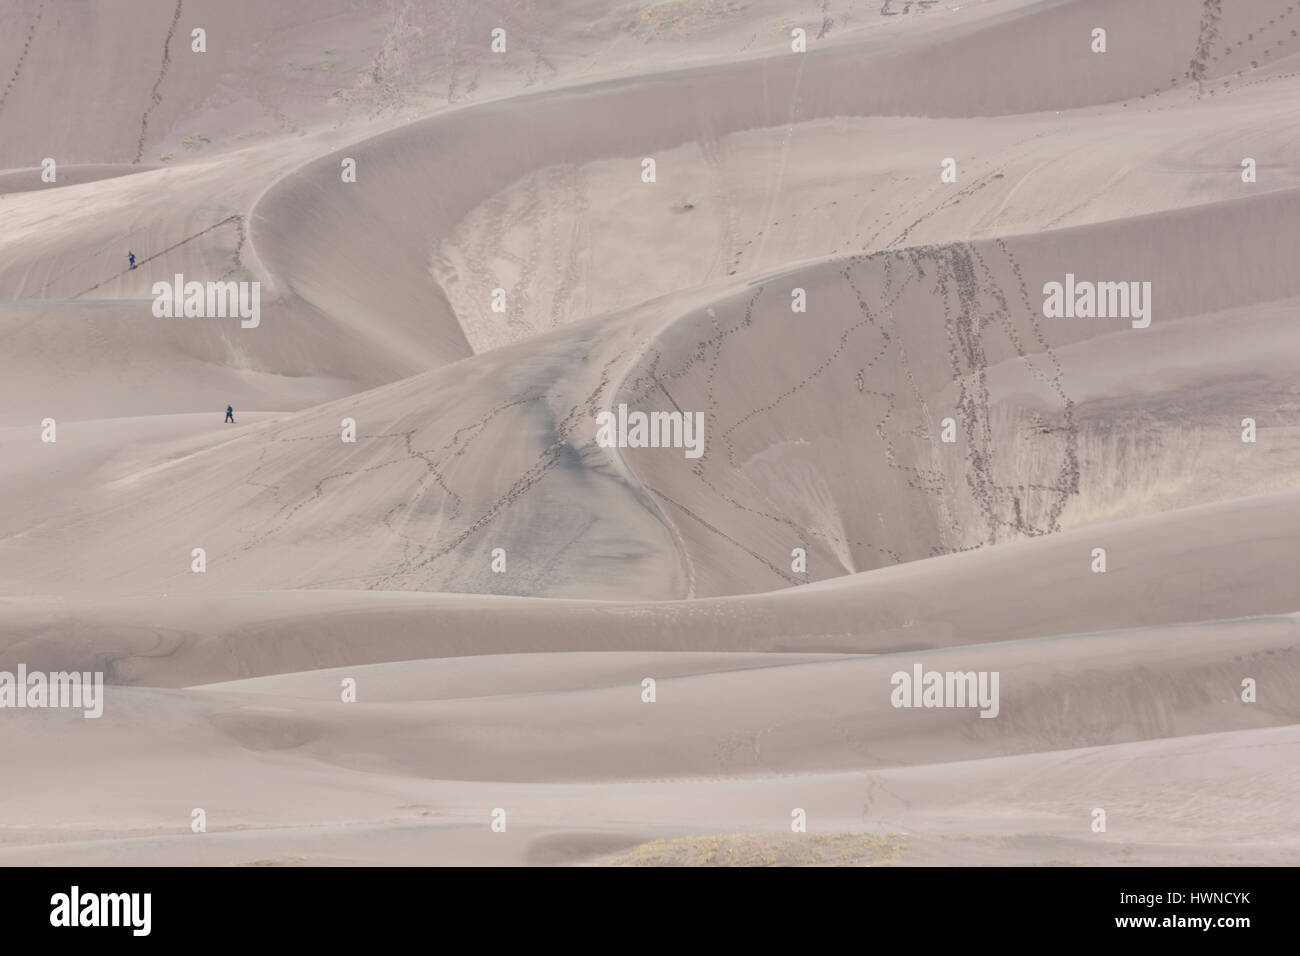 Swirling ridges and patterns of sand create the tourist attraction of the tallest dunes in North America at Great Sand Dunes National Park and Preserv Stock Photo